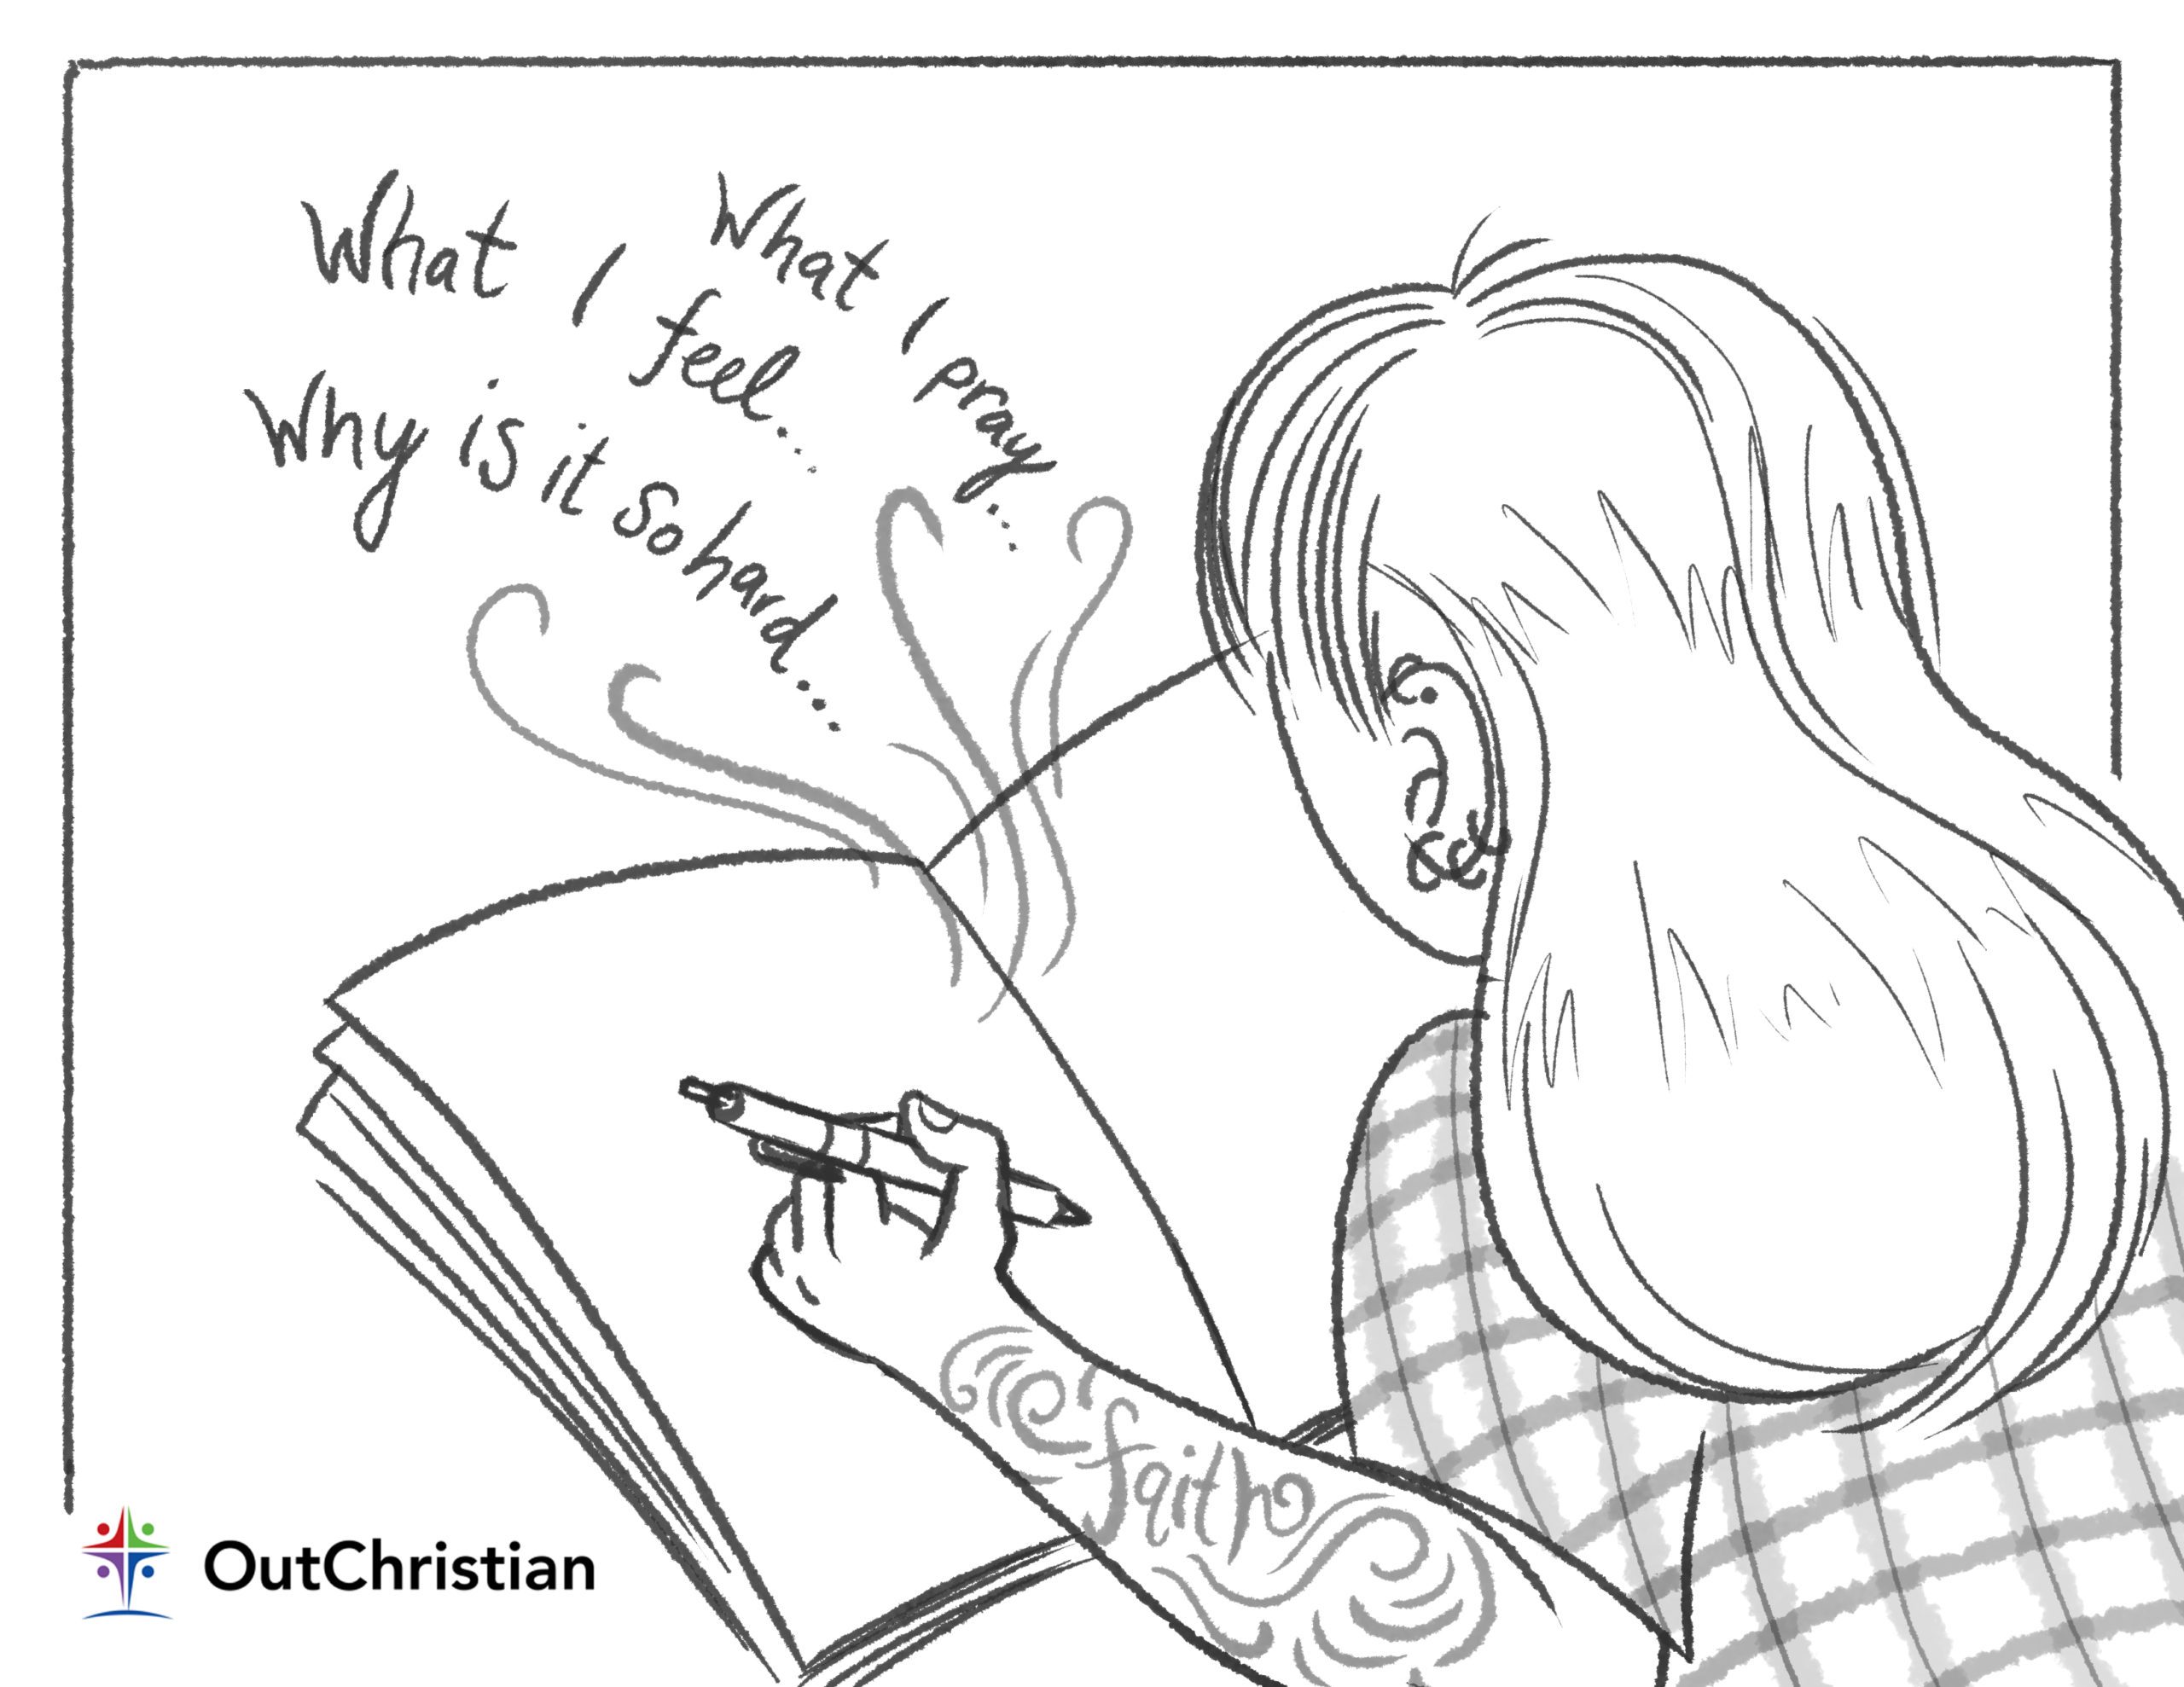 Have Some Fun With These LGBTQ Christian Coloring Pages - OutChristian